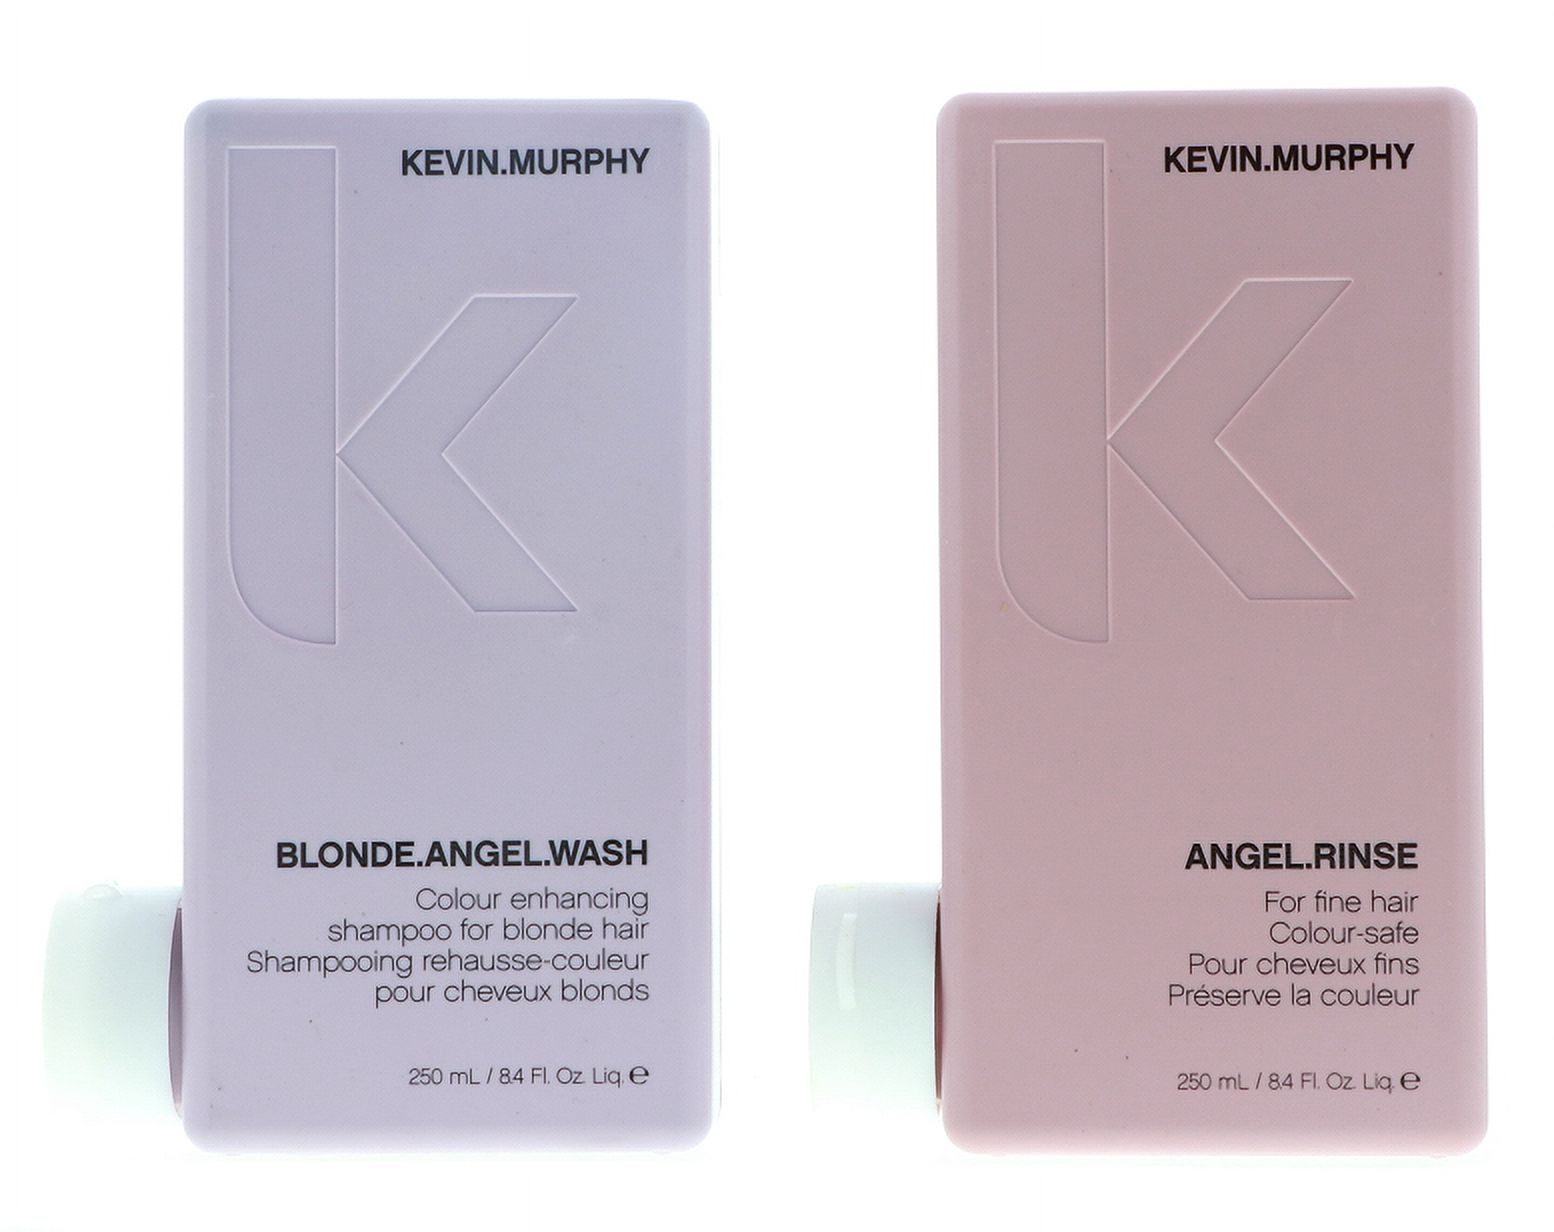 Kevin Murphy Blonde Angel Wash and Rinse Set - 8.4 oz - image 2 of 2